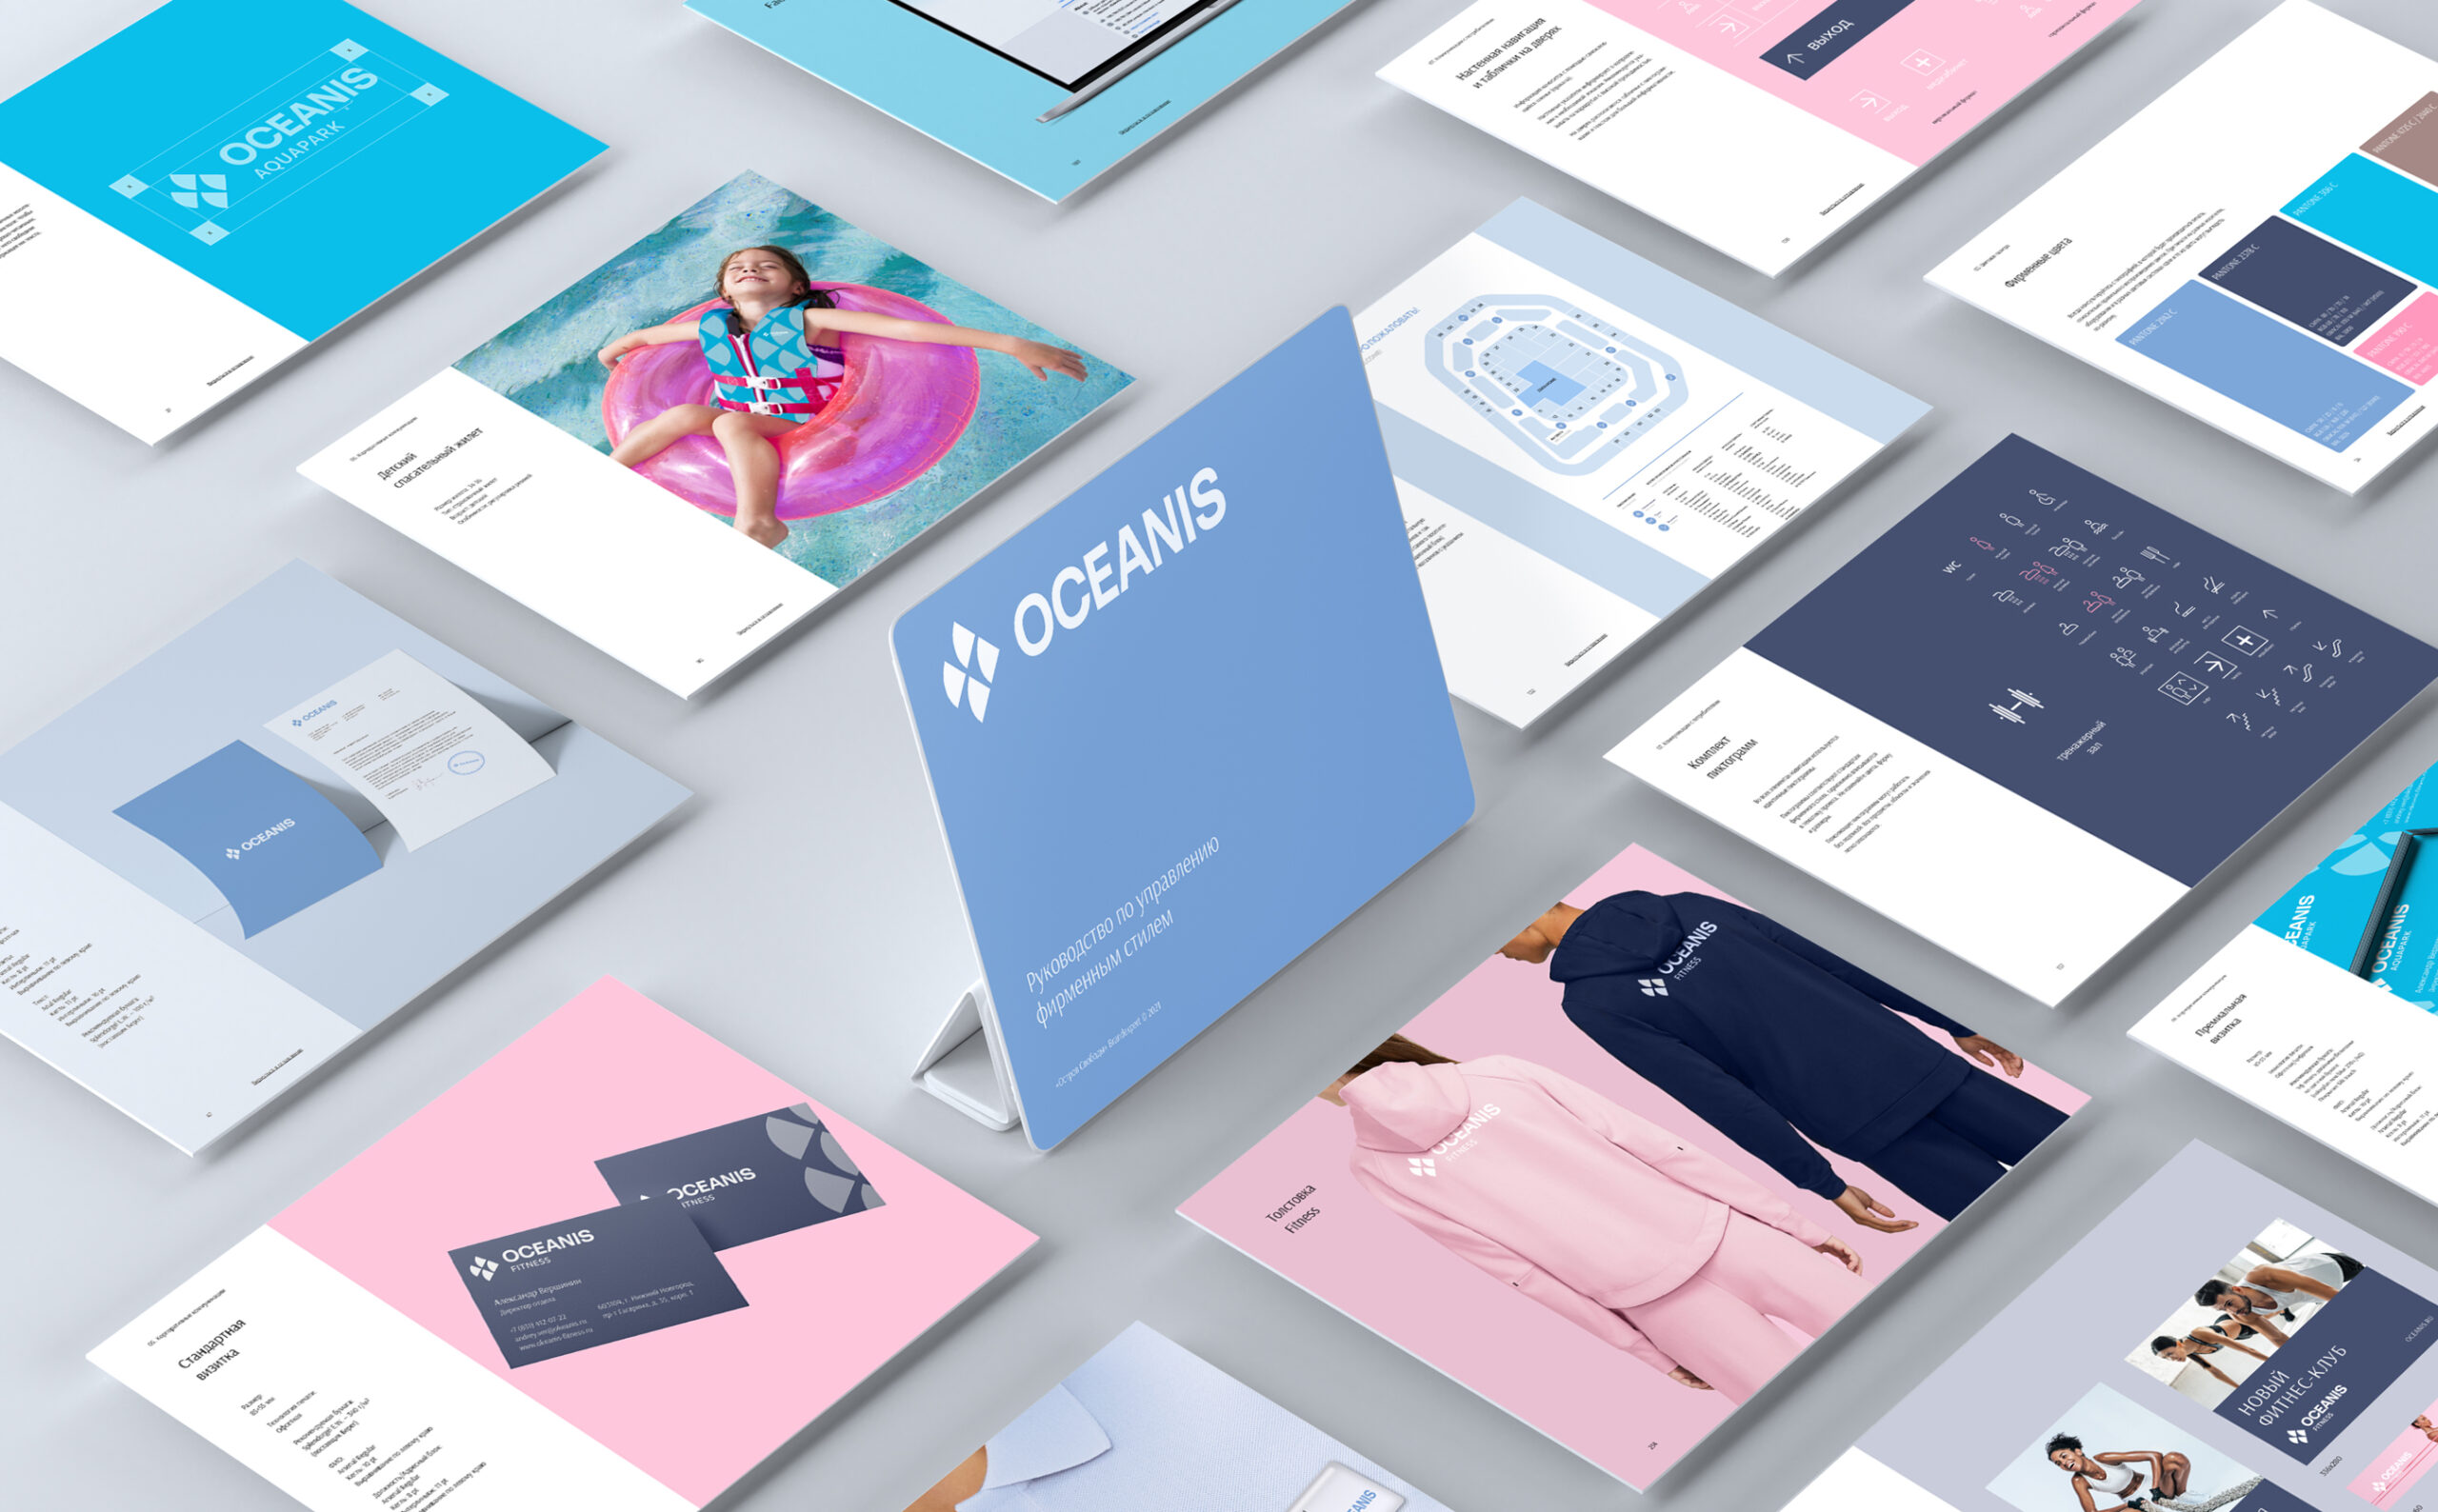 OCEANIS: A Regional Retail Project